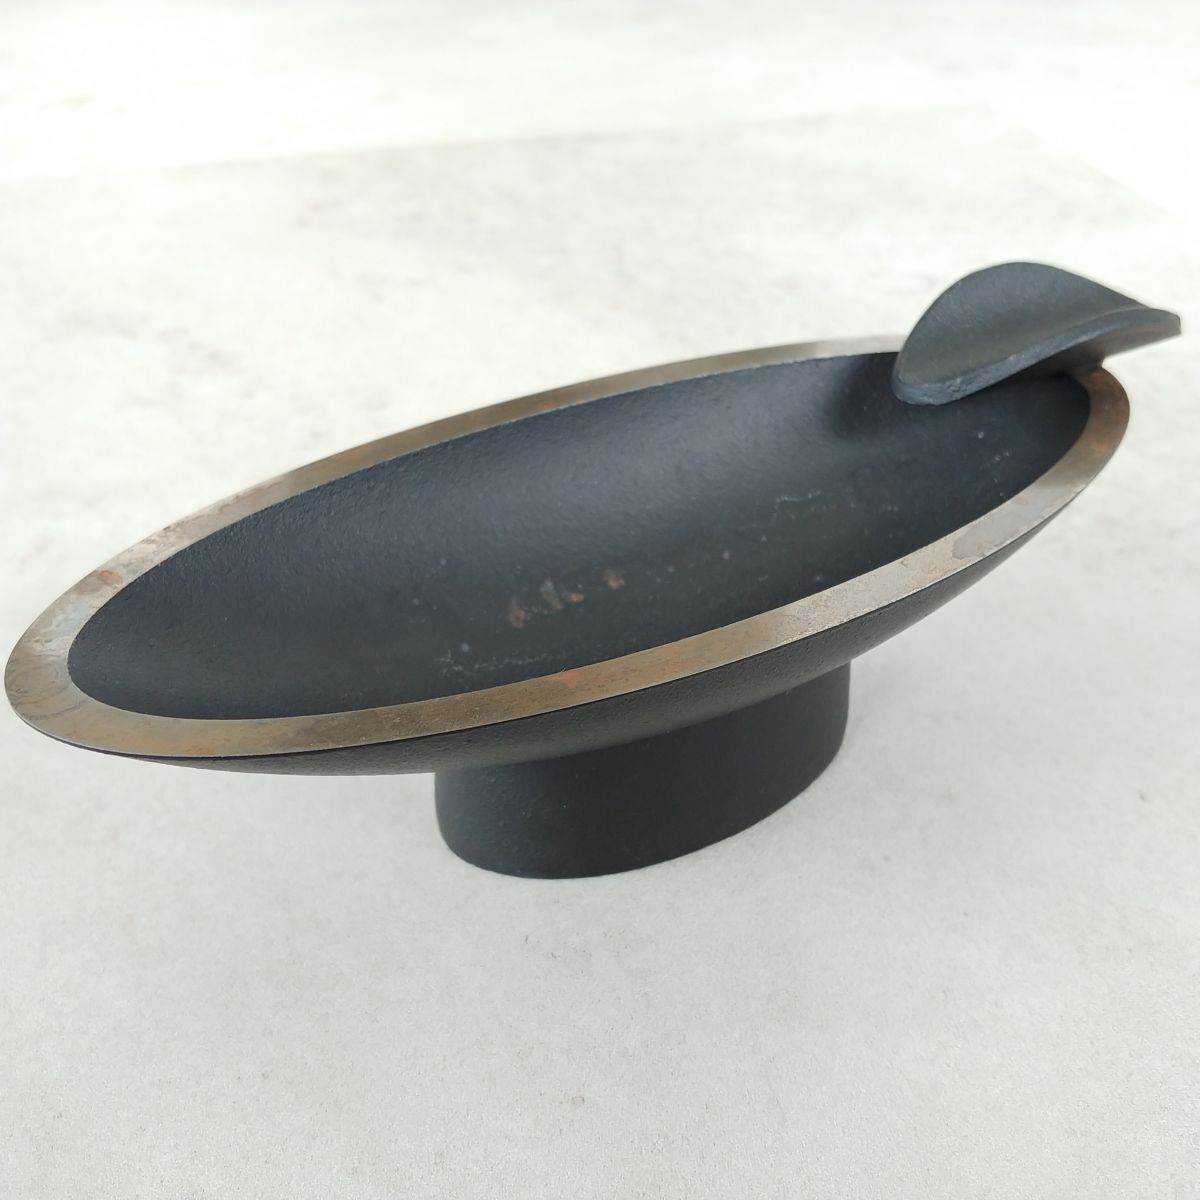 [*1 jpy start *]OH!VAL oval Ashtray south part iron vessel leaf volume for cigar tray ashtray interior objet d'art small articles go in magnet removal and re-installation type MA476